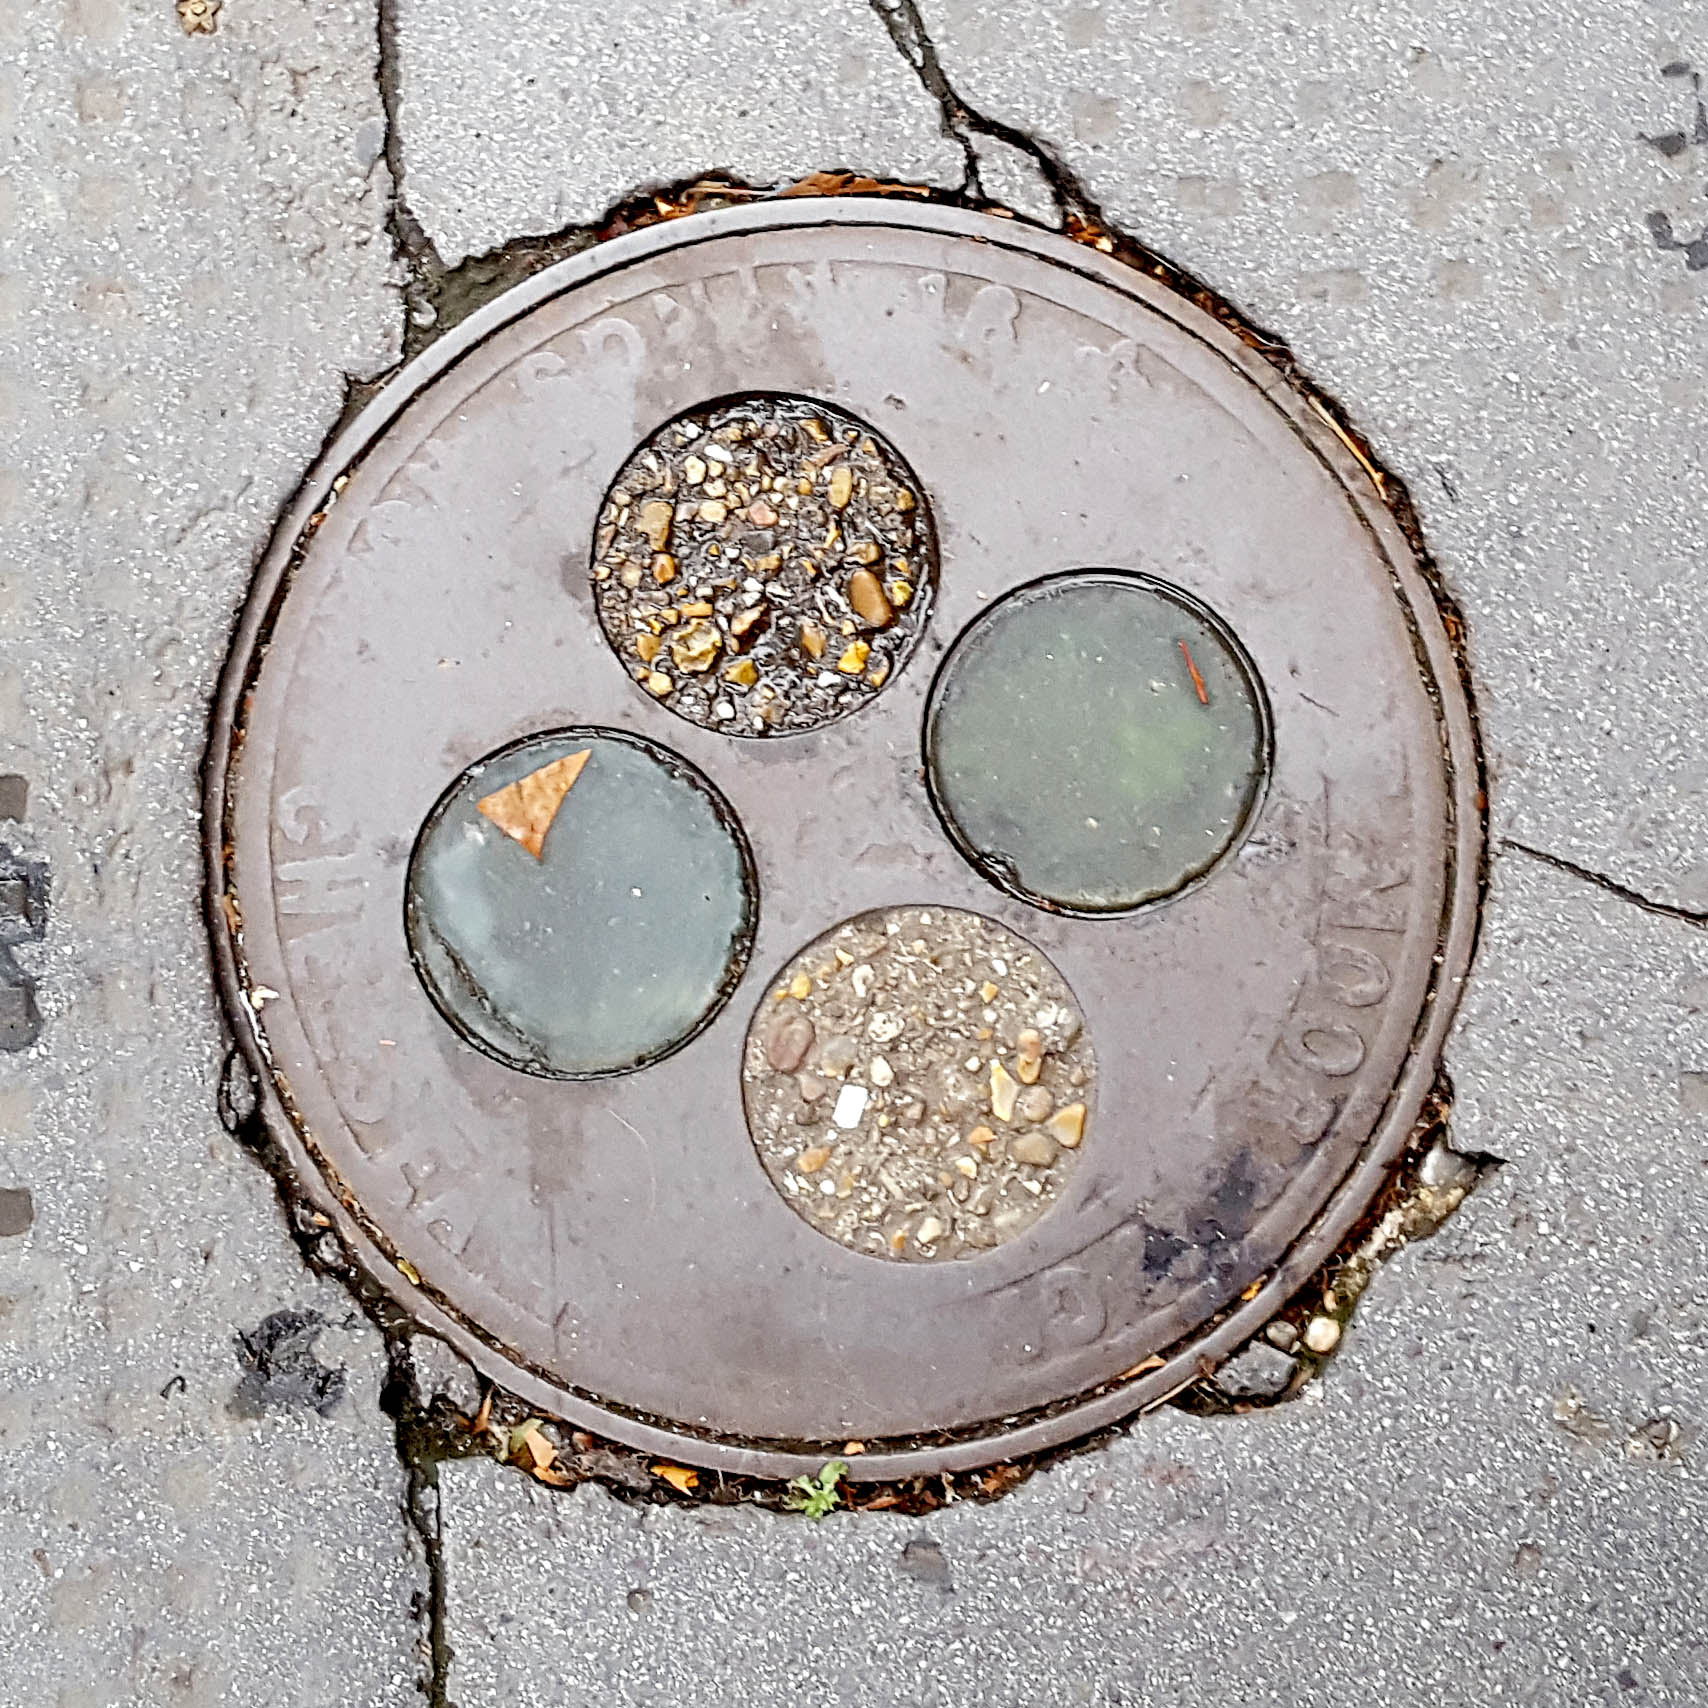 Manhole Cover, London - Cast iron with four circles of concrete and glass